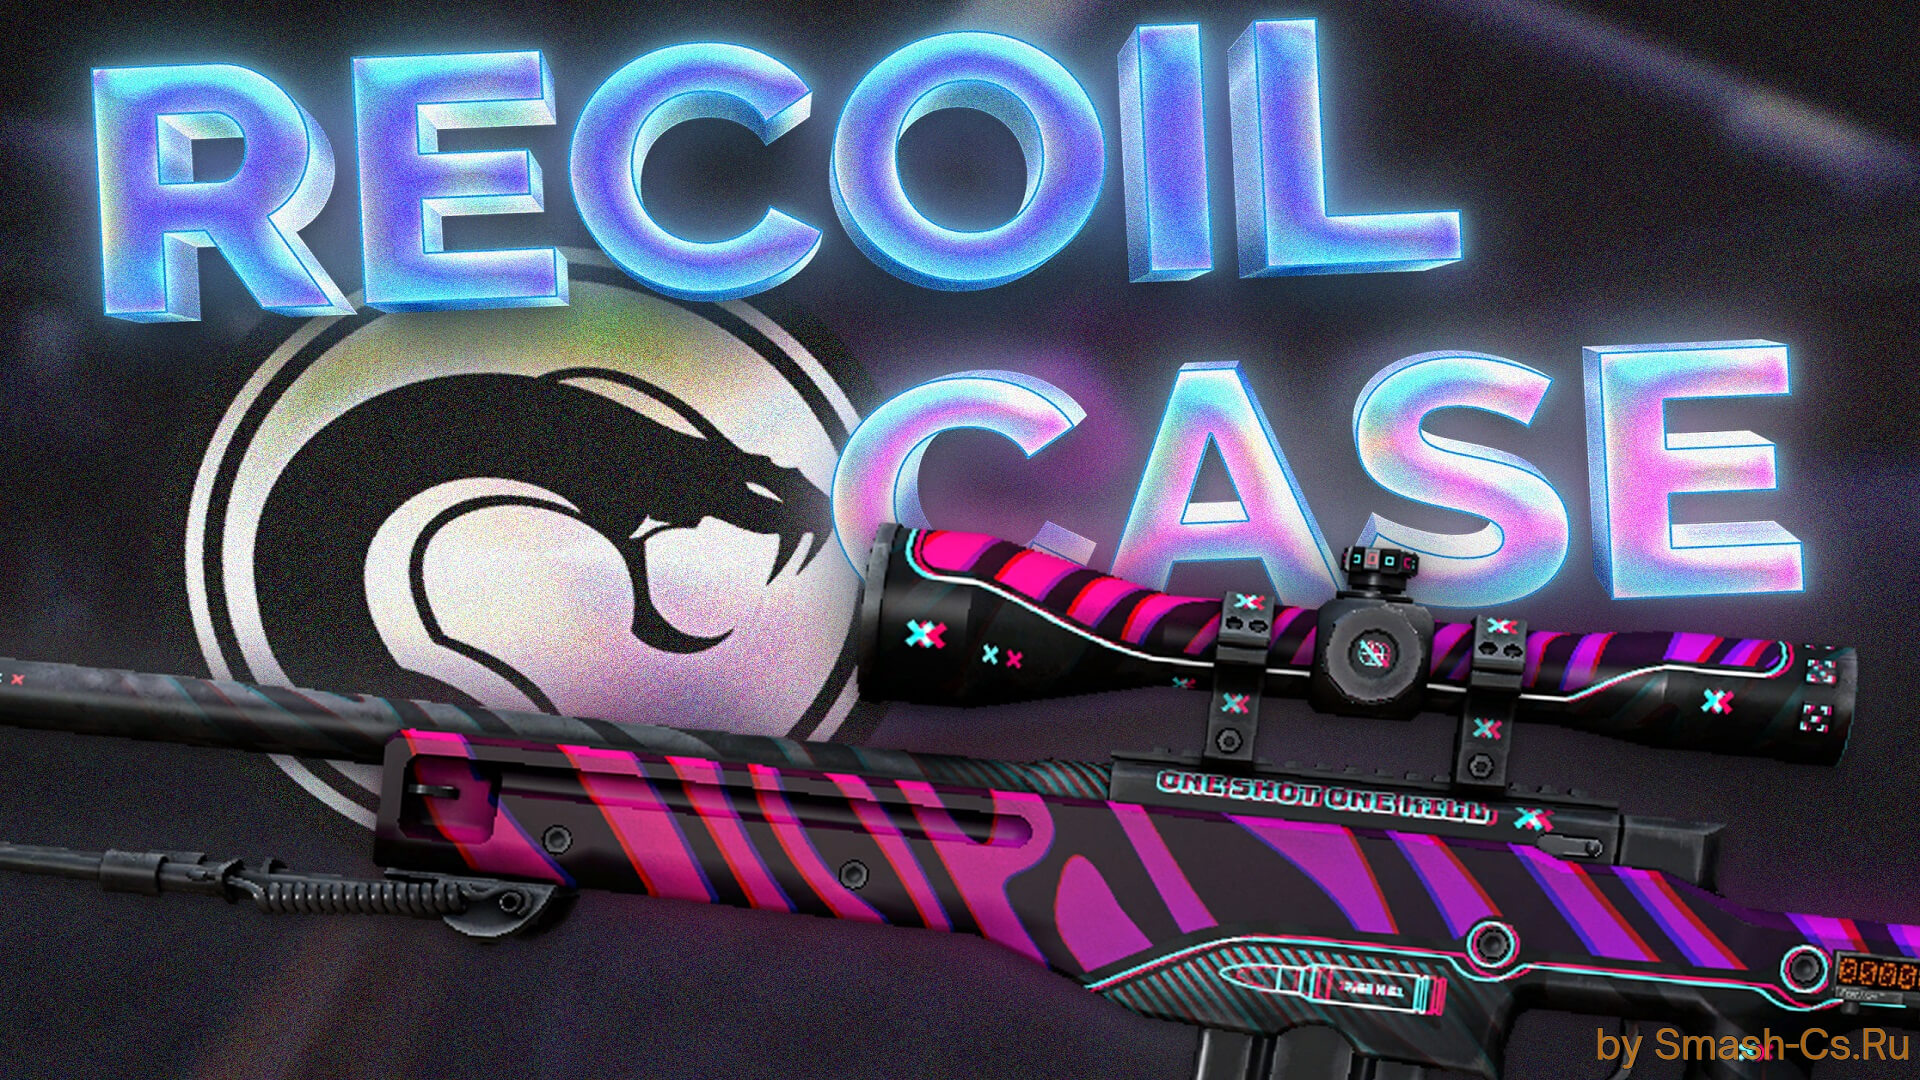 Recoil Case from CS:GO for CSS | by Tsvetik:D & 1NSOMNIA